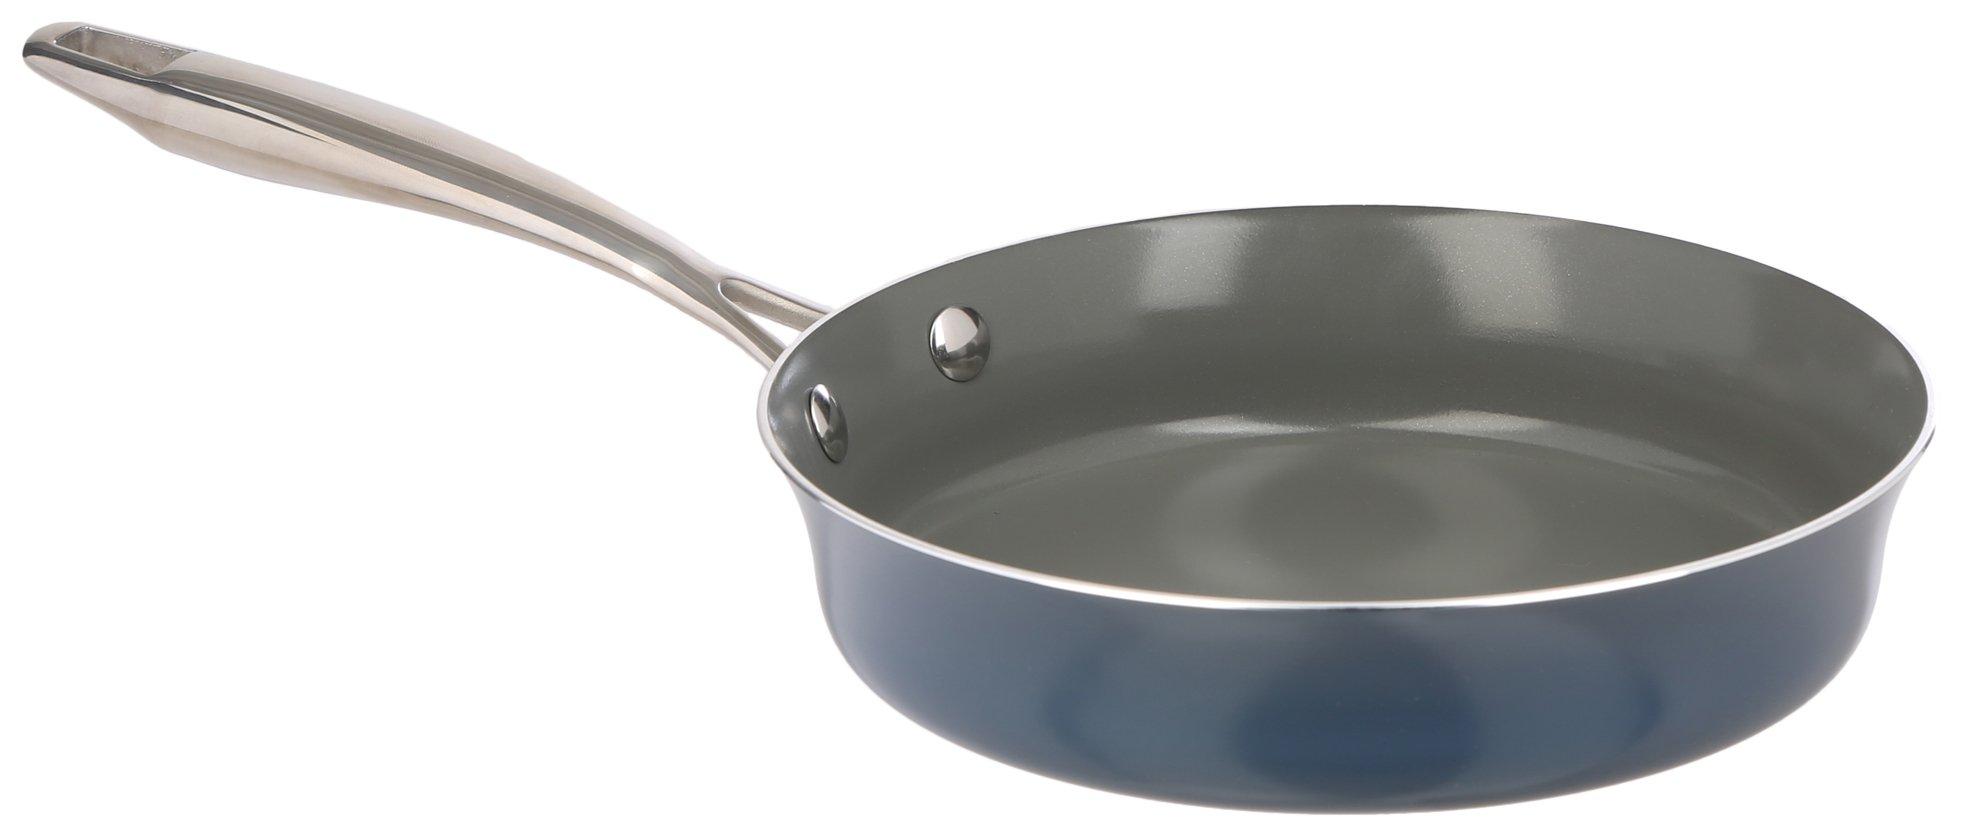 Zest Kitchen and Home Ceramic 10in. Non-Stick Fry Pan